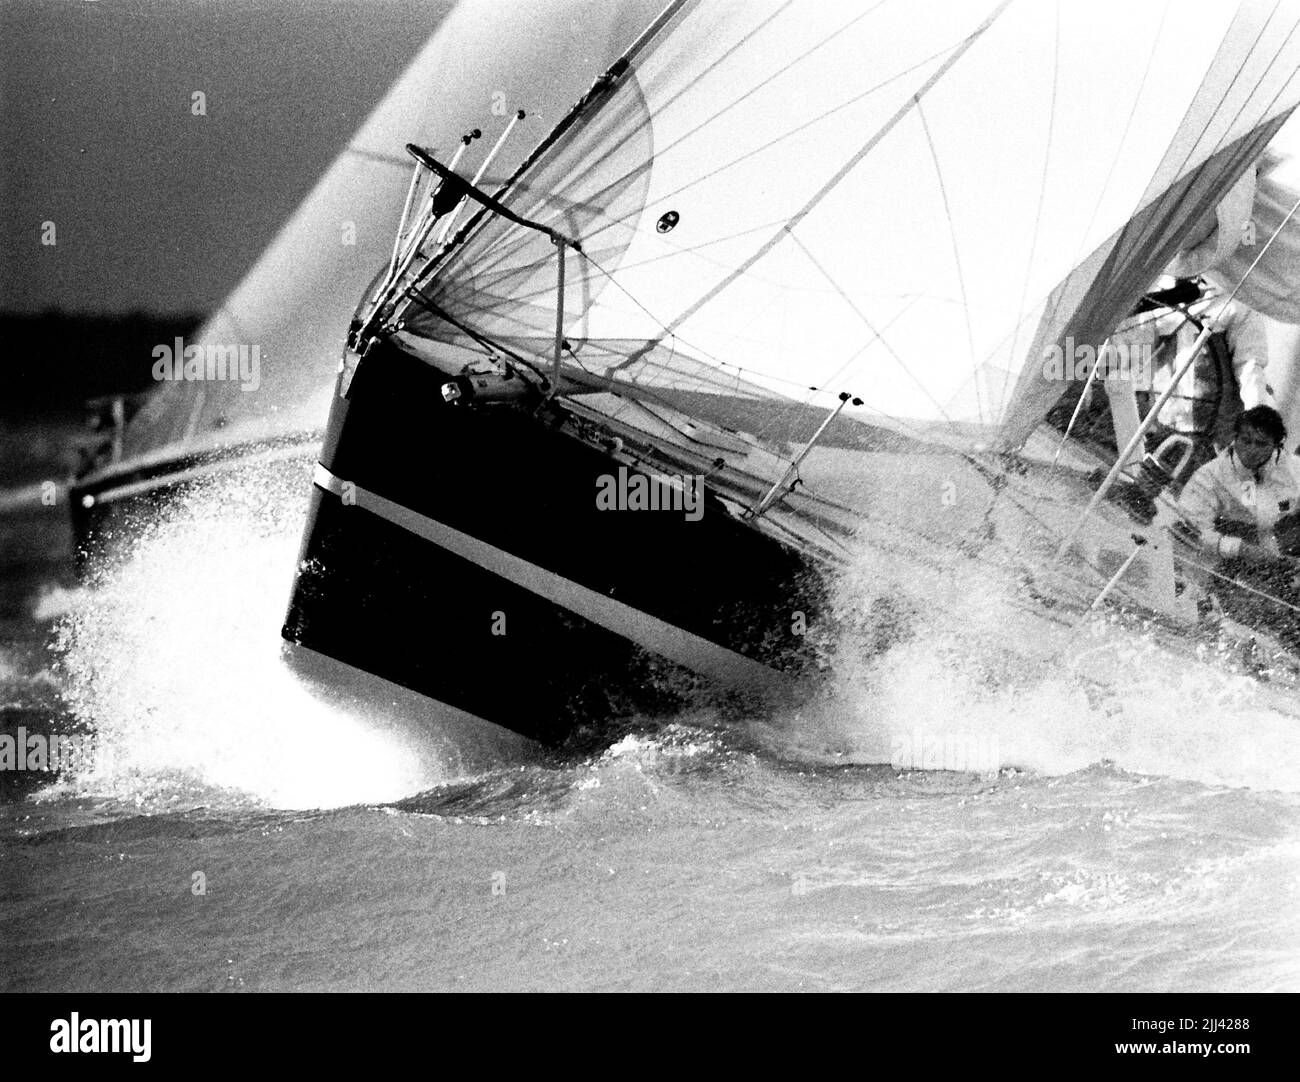 AJAXNETPHOTO. 1985. SOLENT, ENGLAND. - ADMIRAL'S CUP - MARIONETTE (SINGAPORE) AT START OF FASTNET RACE IN LUMPY SEAS OFF EGYPT POINT. PHOTO:JONATHAN EASTLAND/AJAX. REF: 340 222904 10 Stock Photo